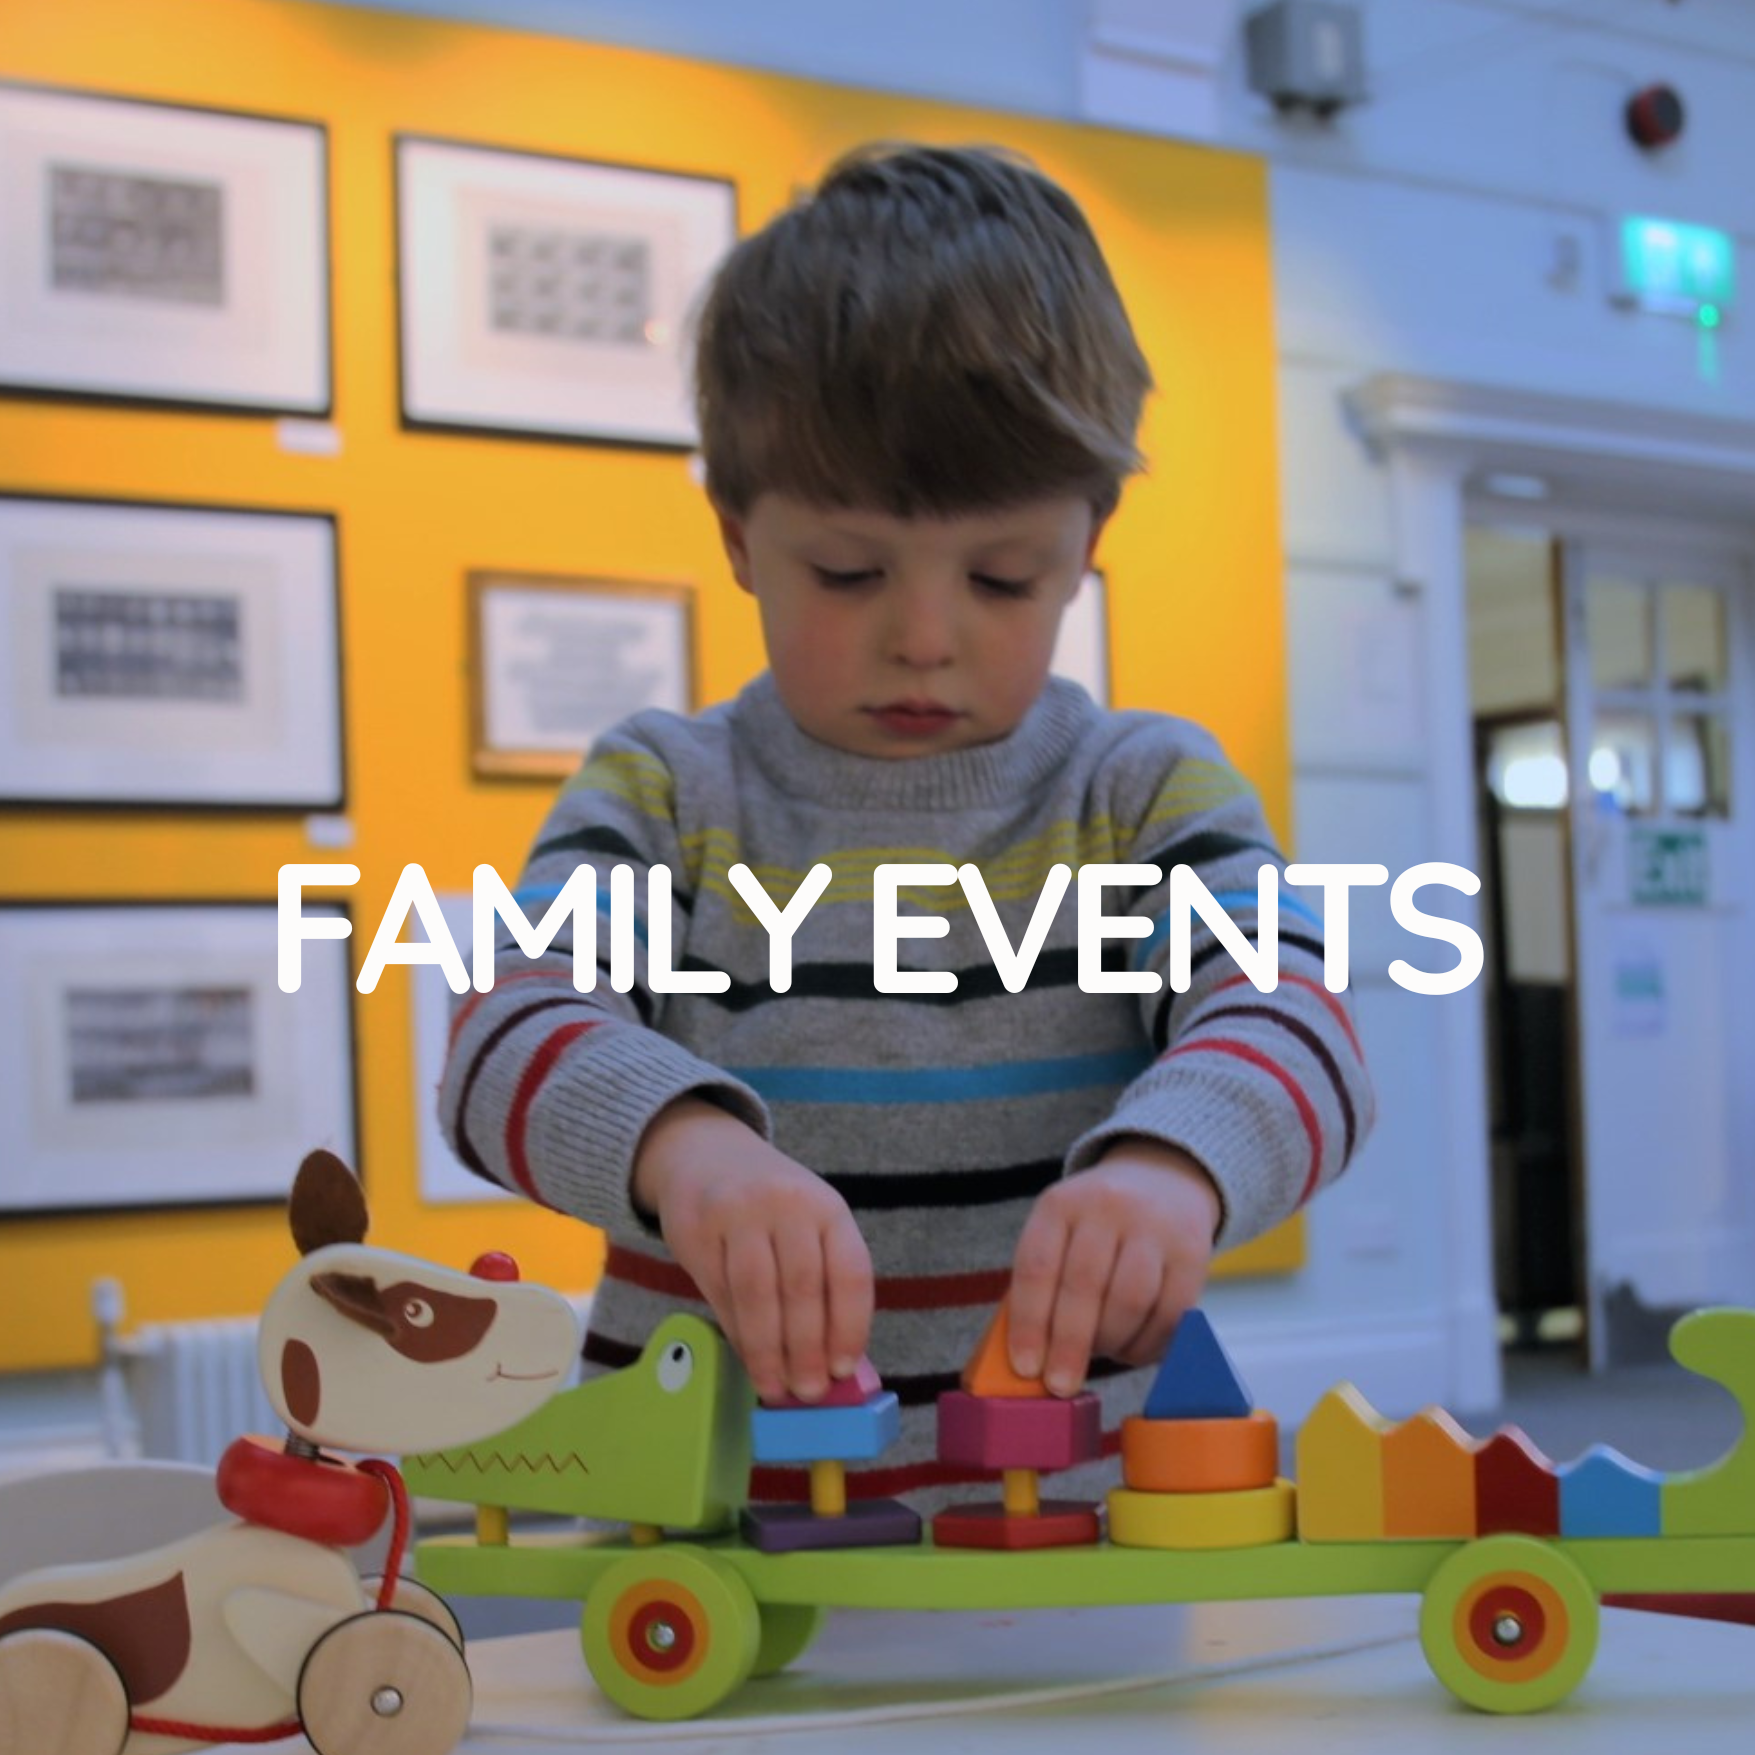 Family events at Kingston Museum